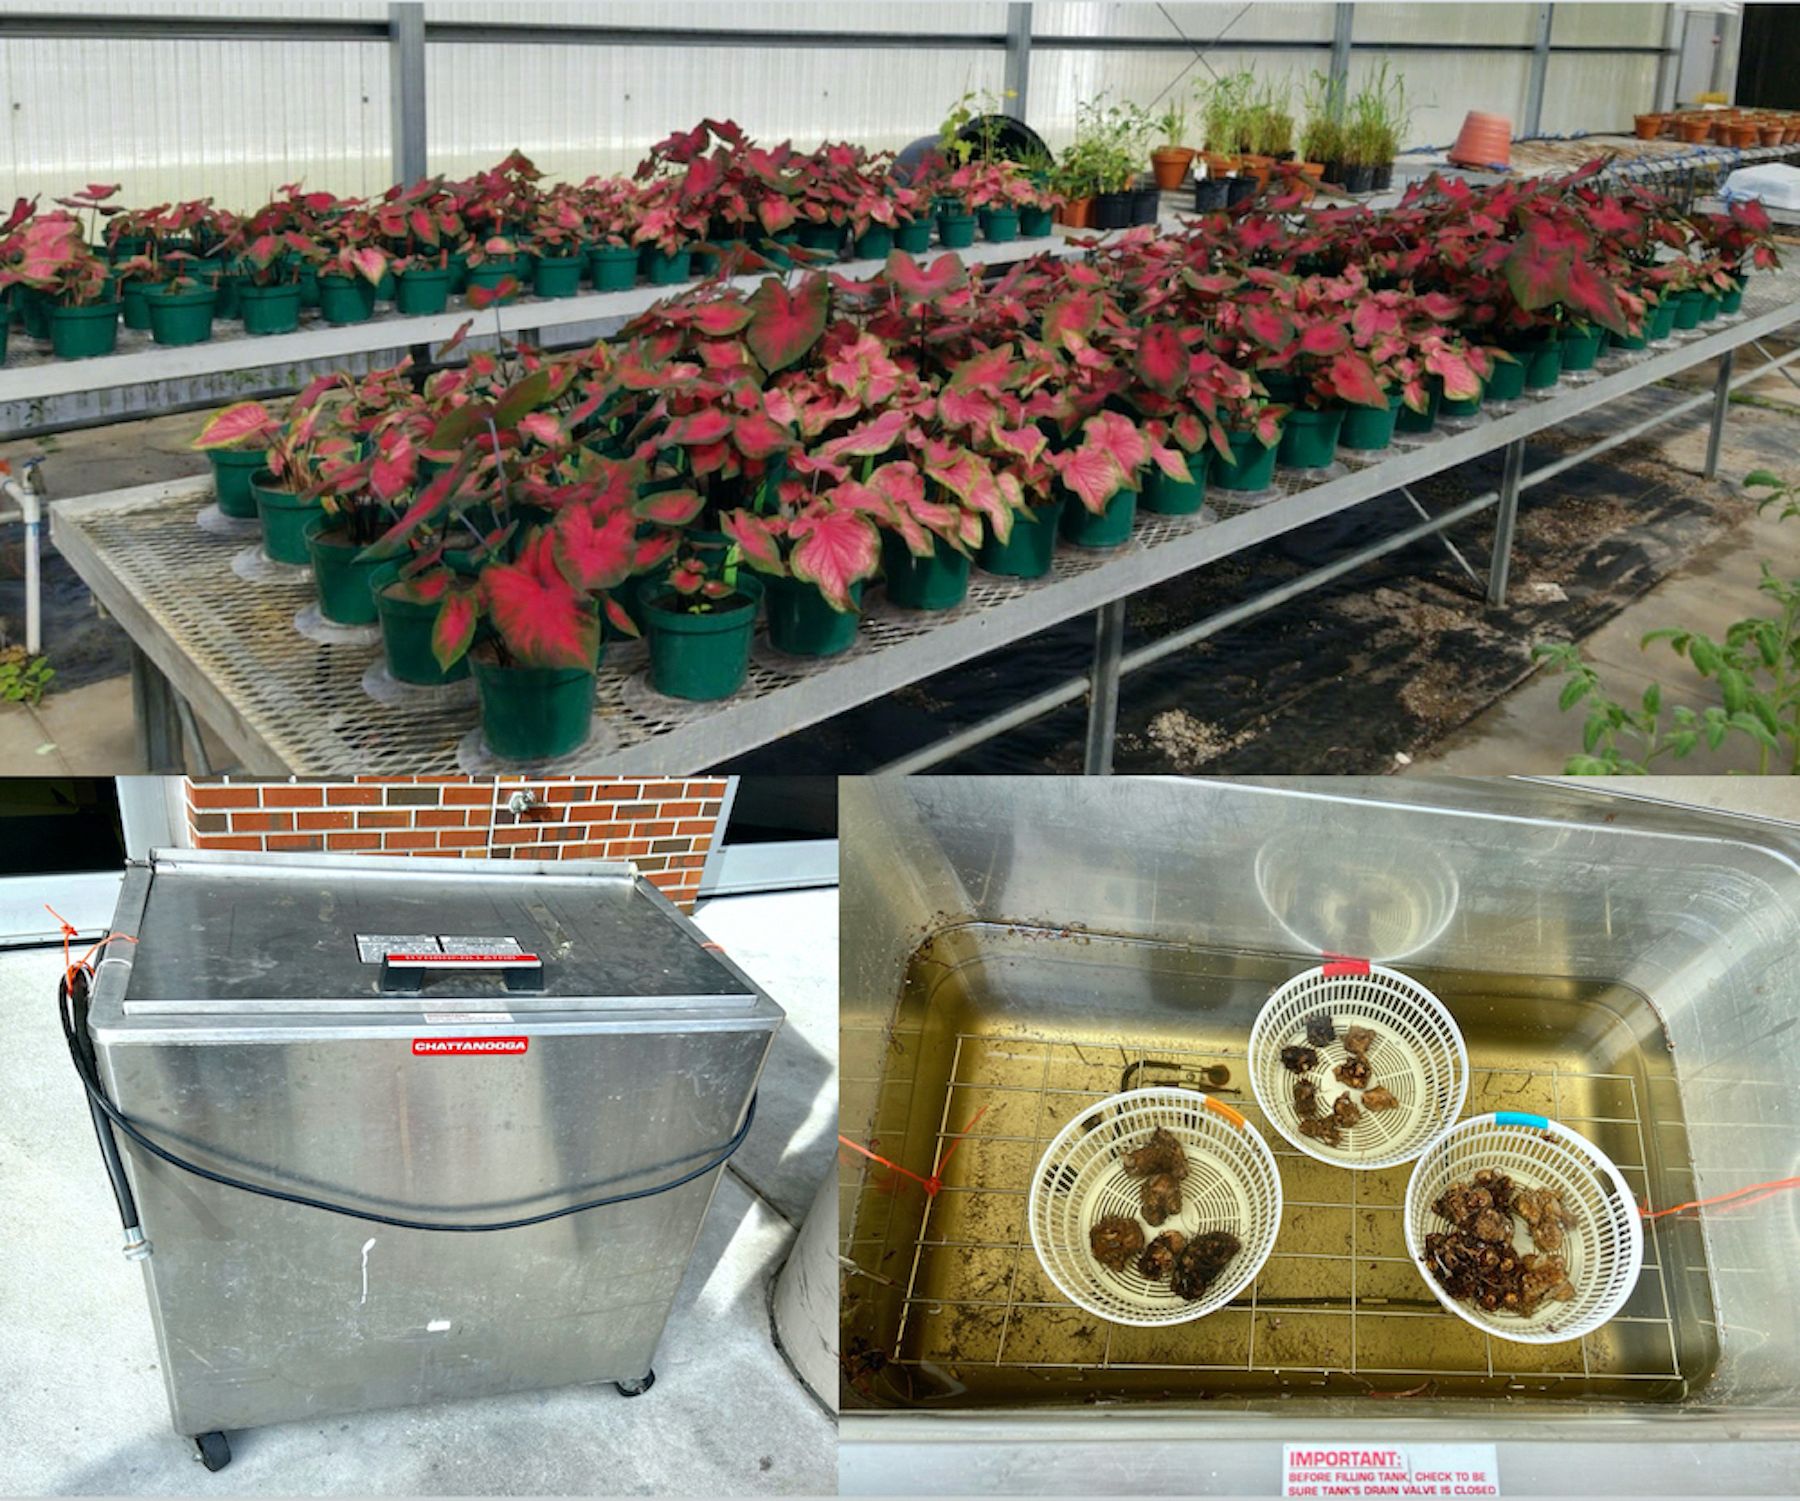 Greenhouse trials were conducted at the UF/GCREC from 2019-2020 to screen the potential resistant caladium cultivars. 